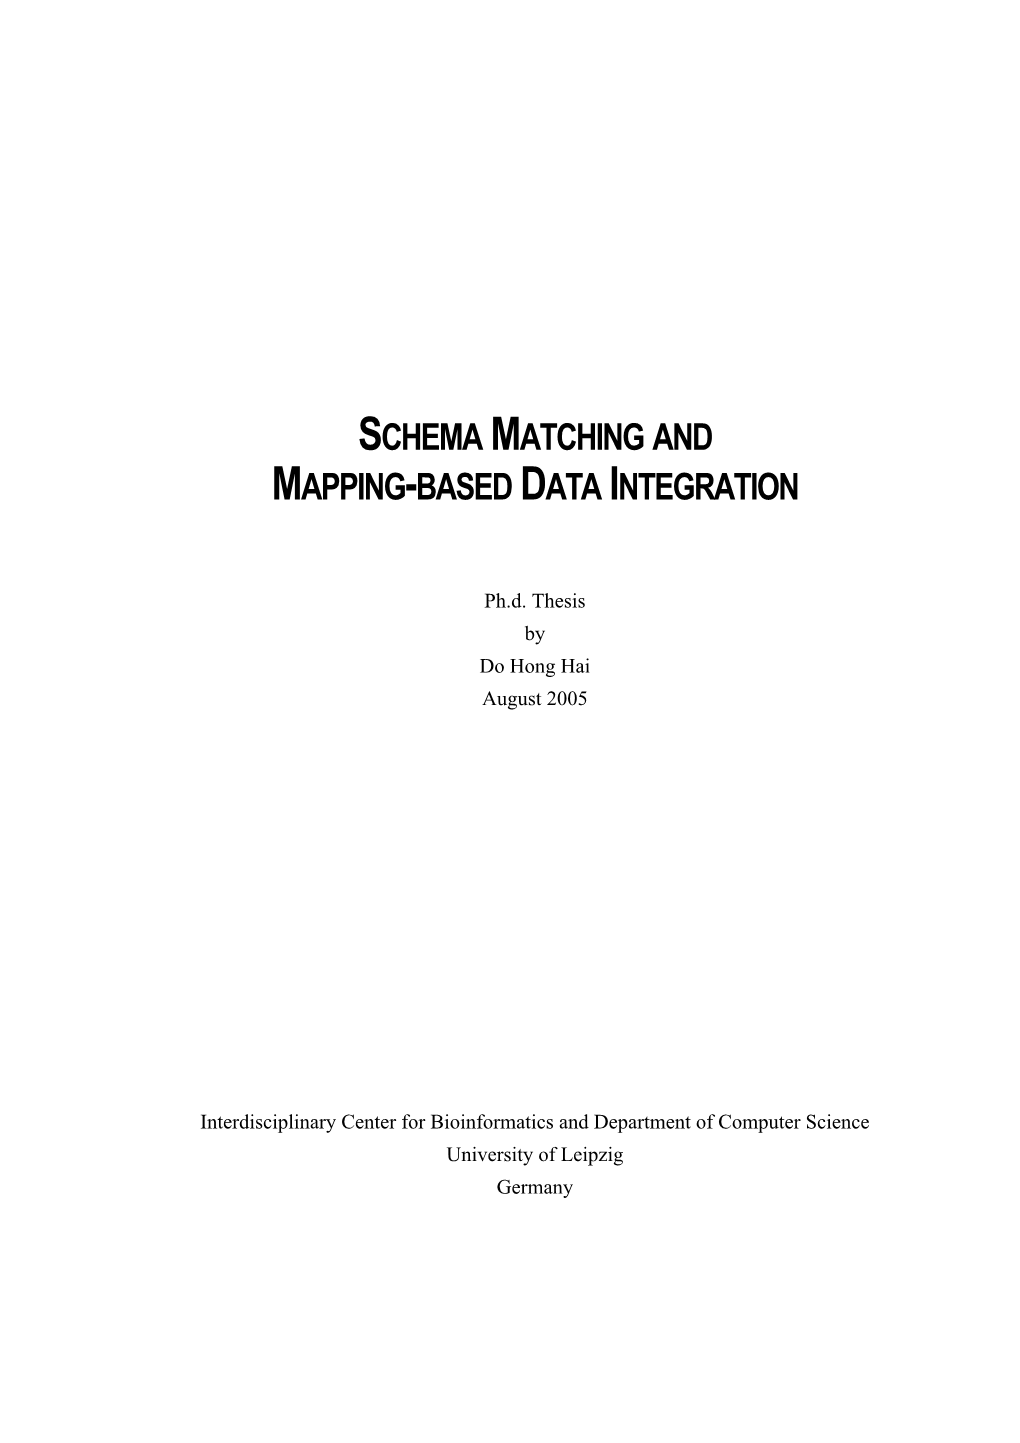 Schema Matching and Mapping-Based Data Integration